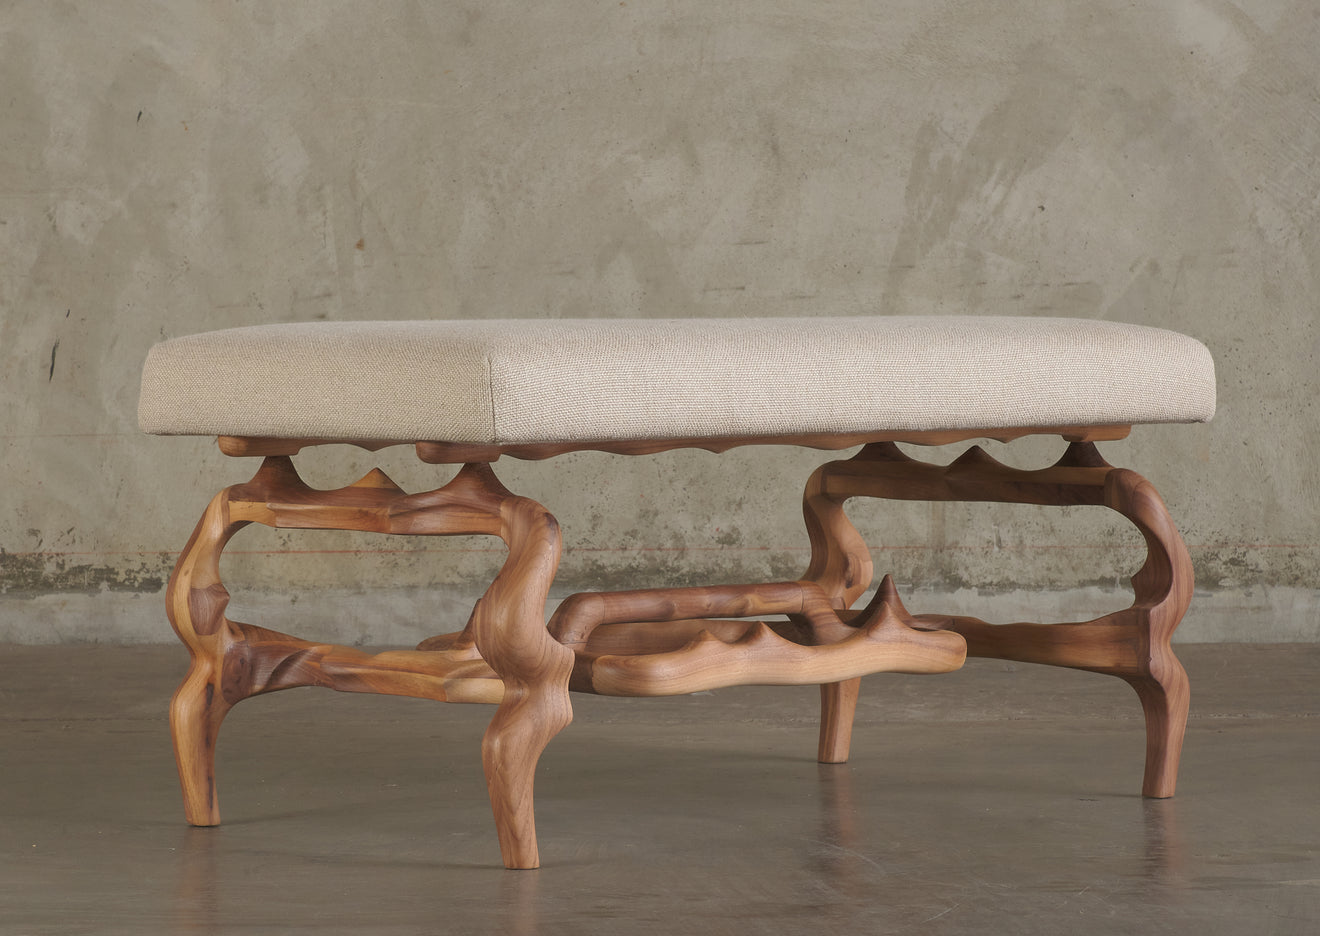 LARGE STOOL DESIGNED BY VICTOR ROMAN MANUFACTURED BY ATELIER(ER)